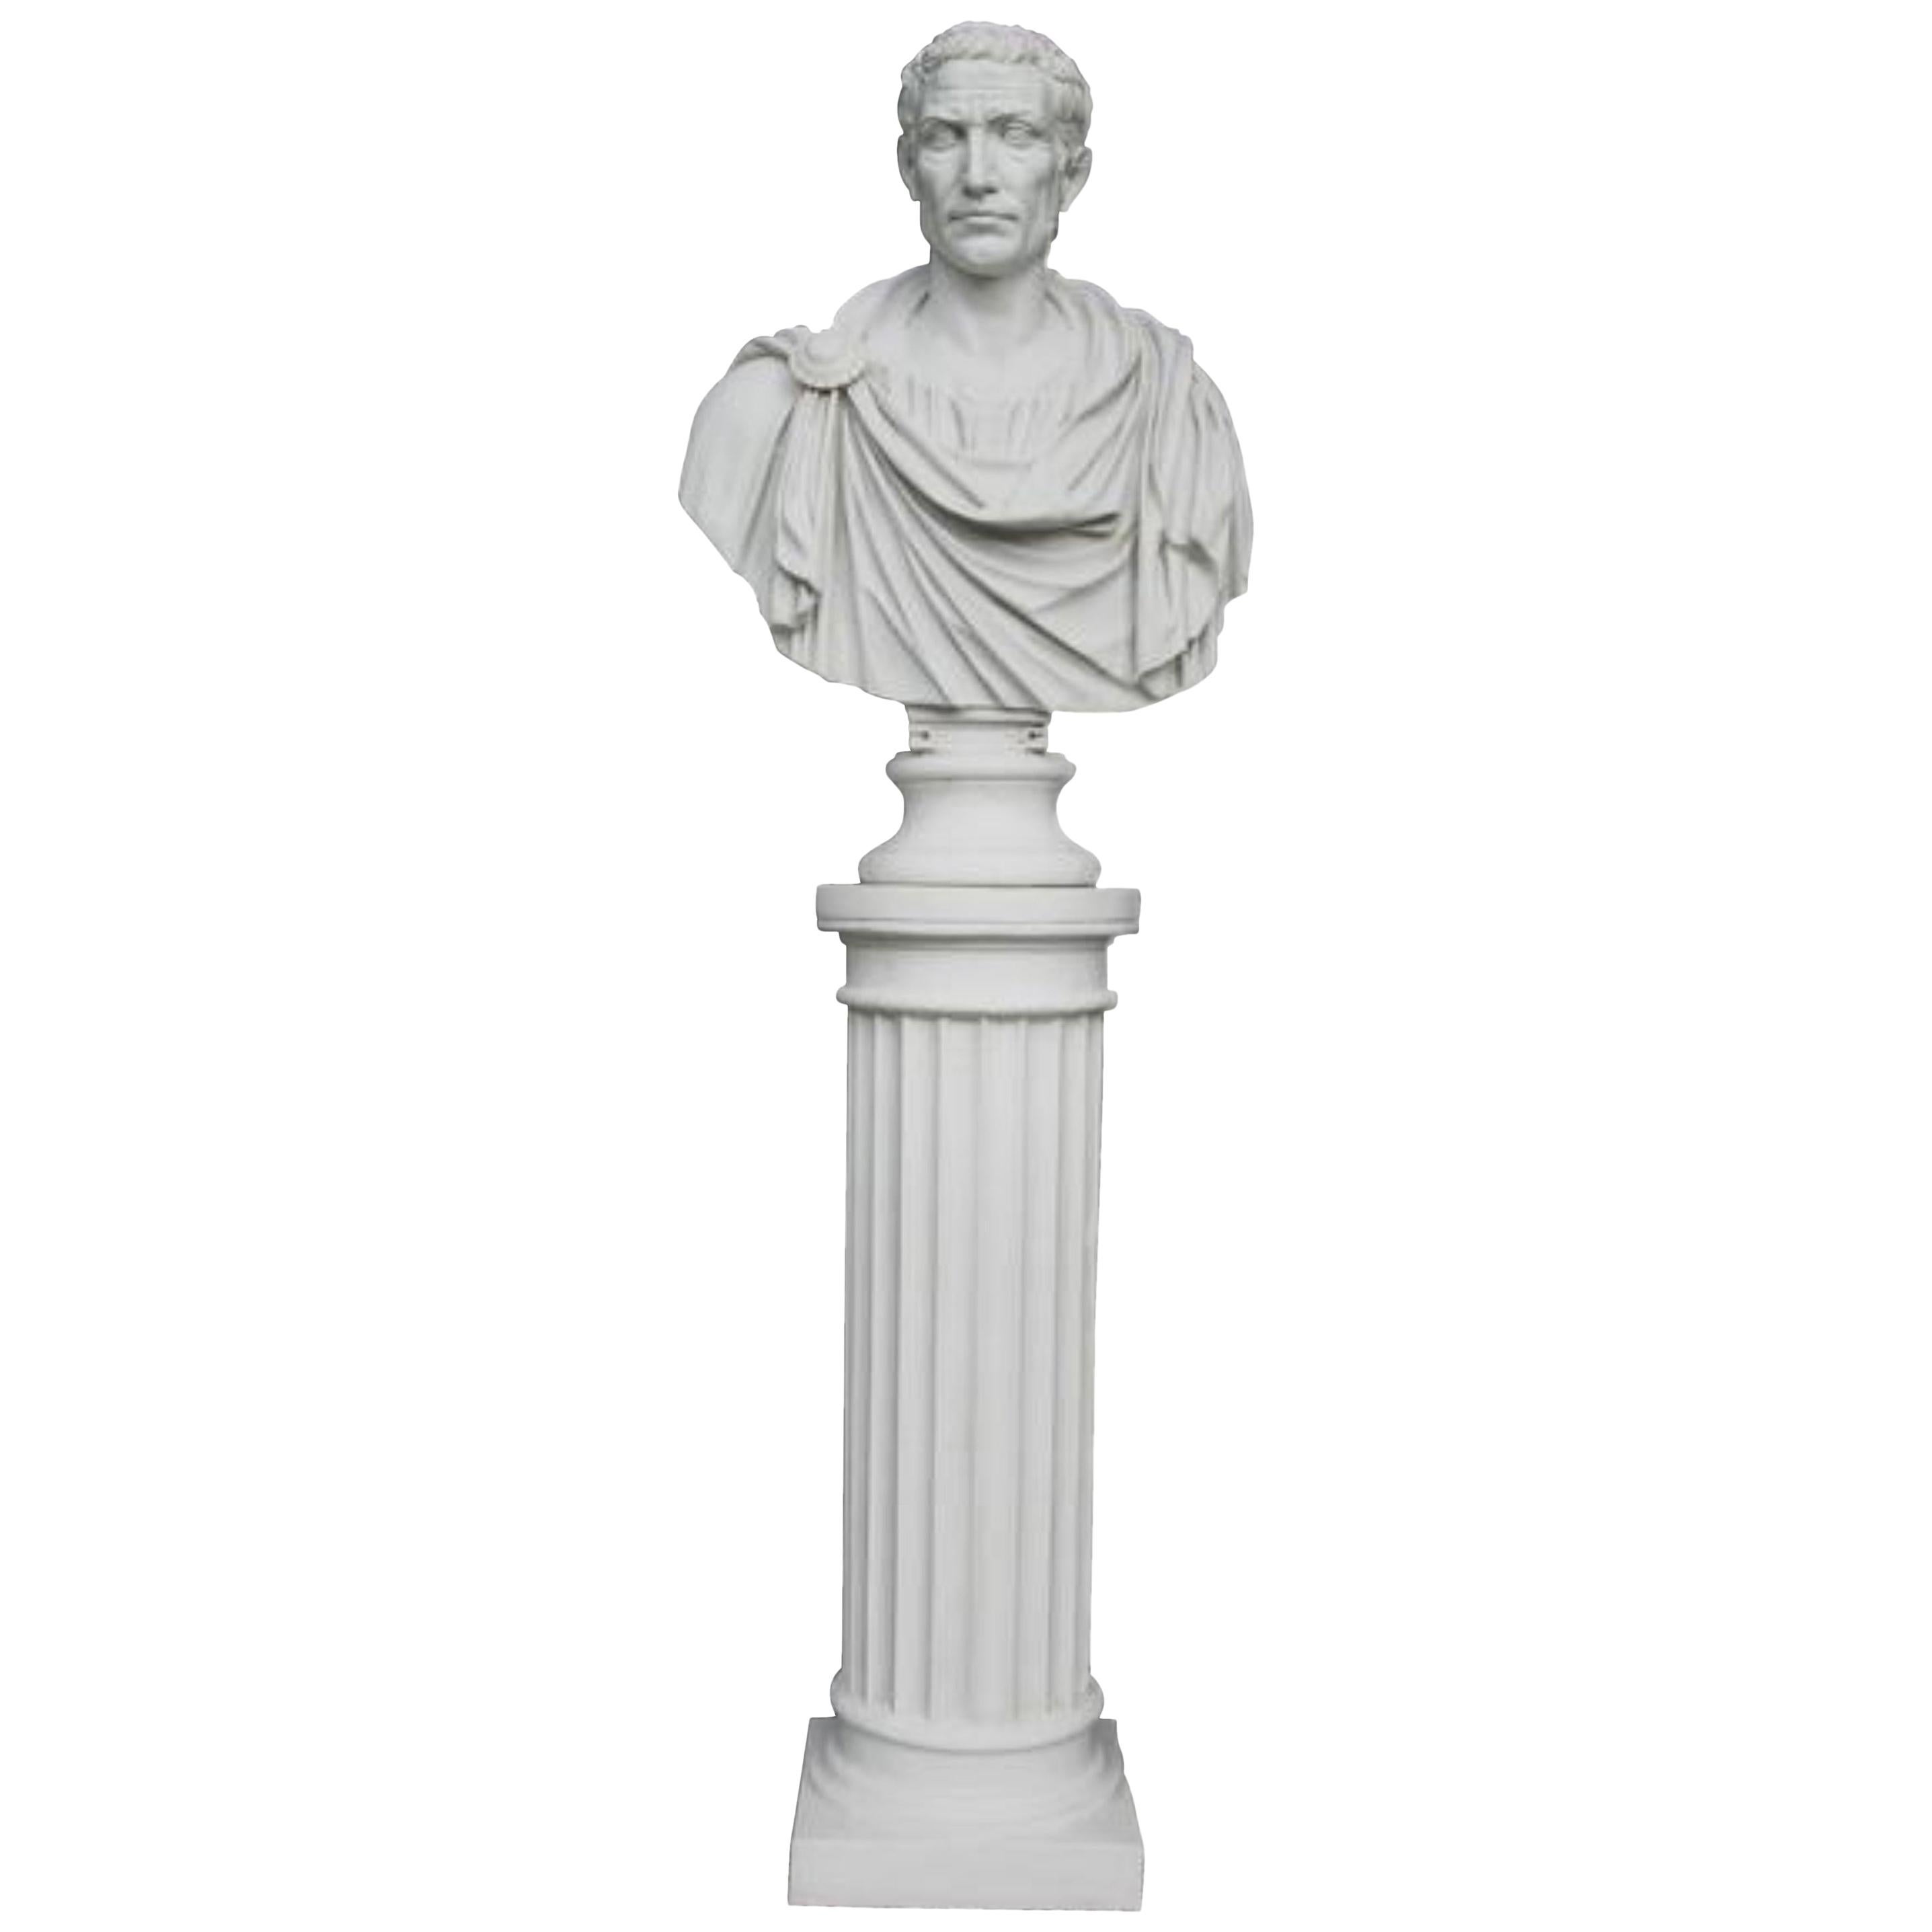 Julius Caesar Bust Sculpture ‘in Toga’ with Column, 20th Century For Sale